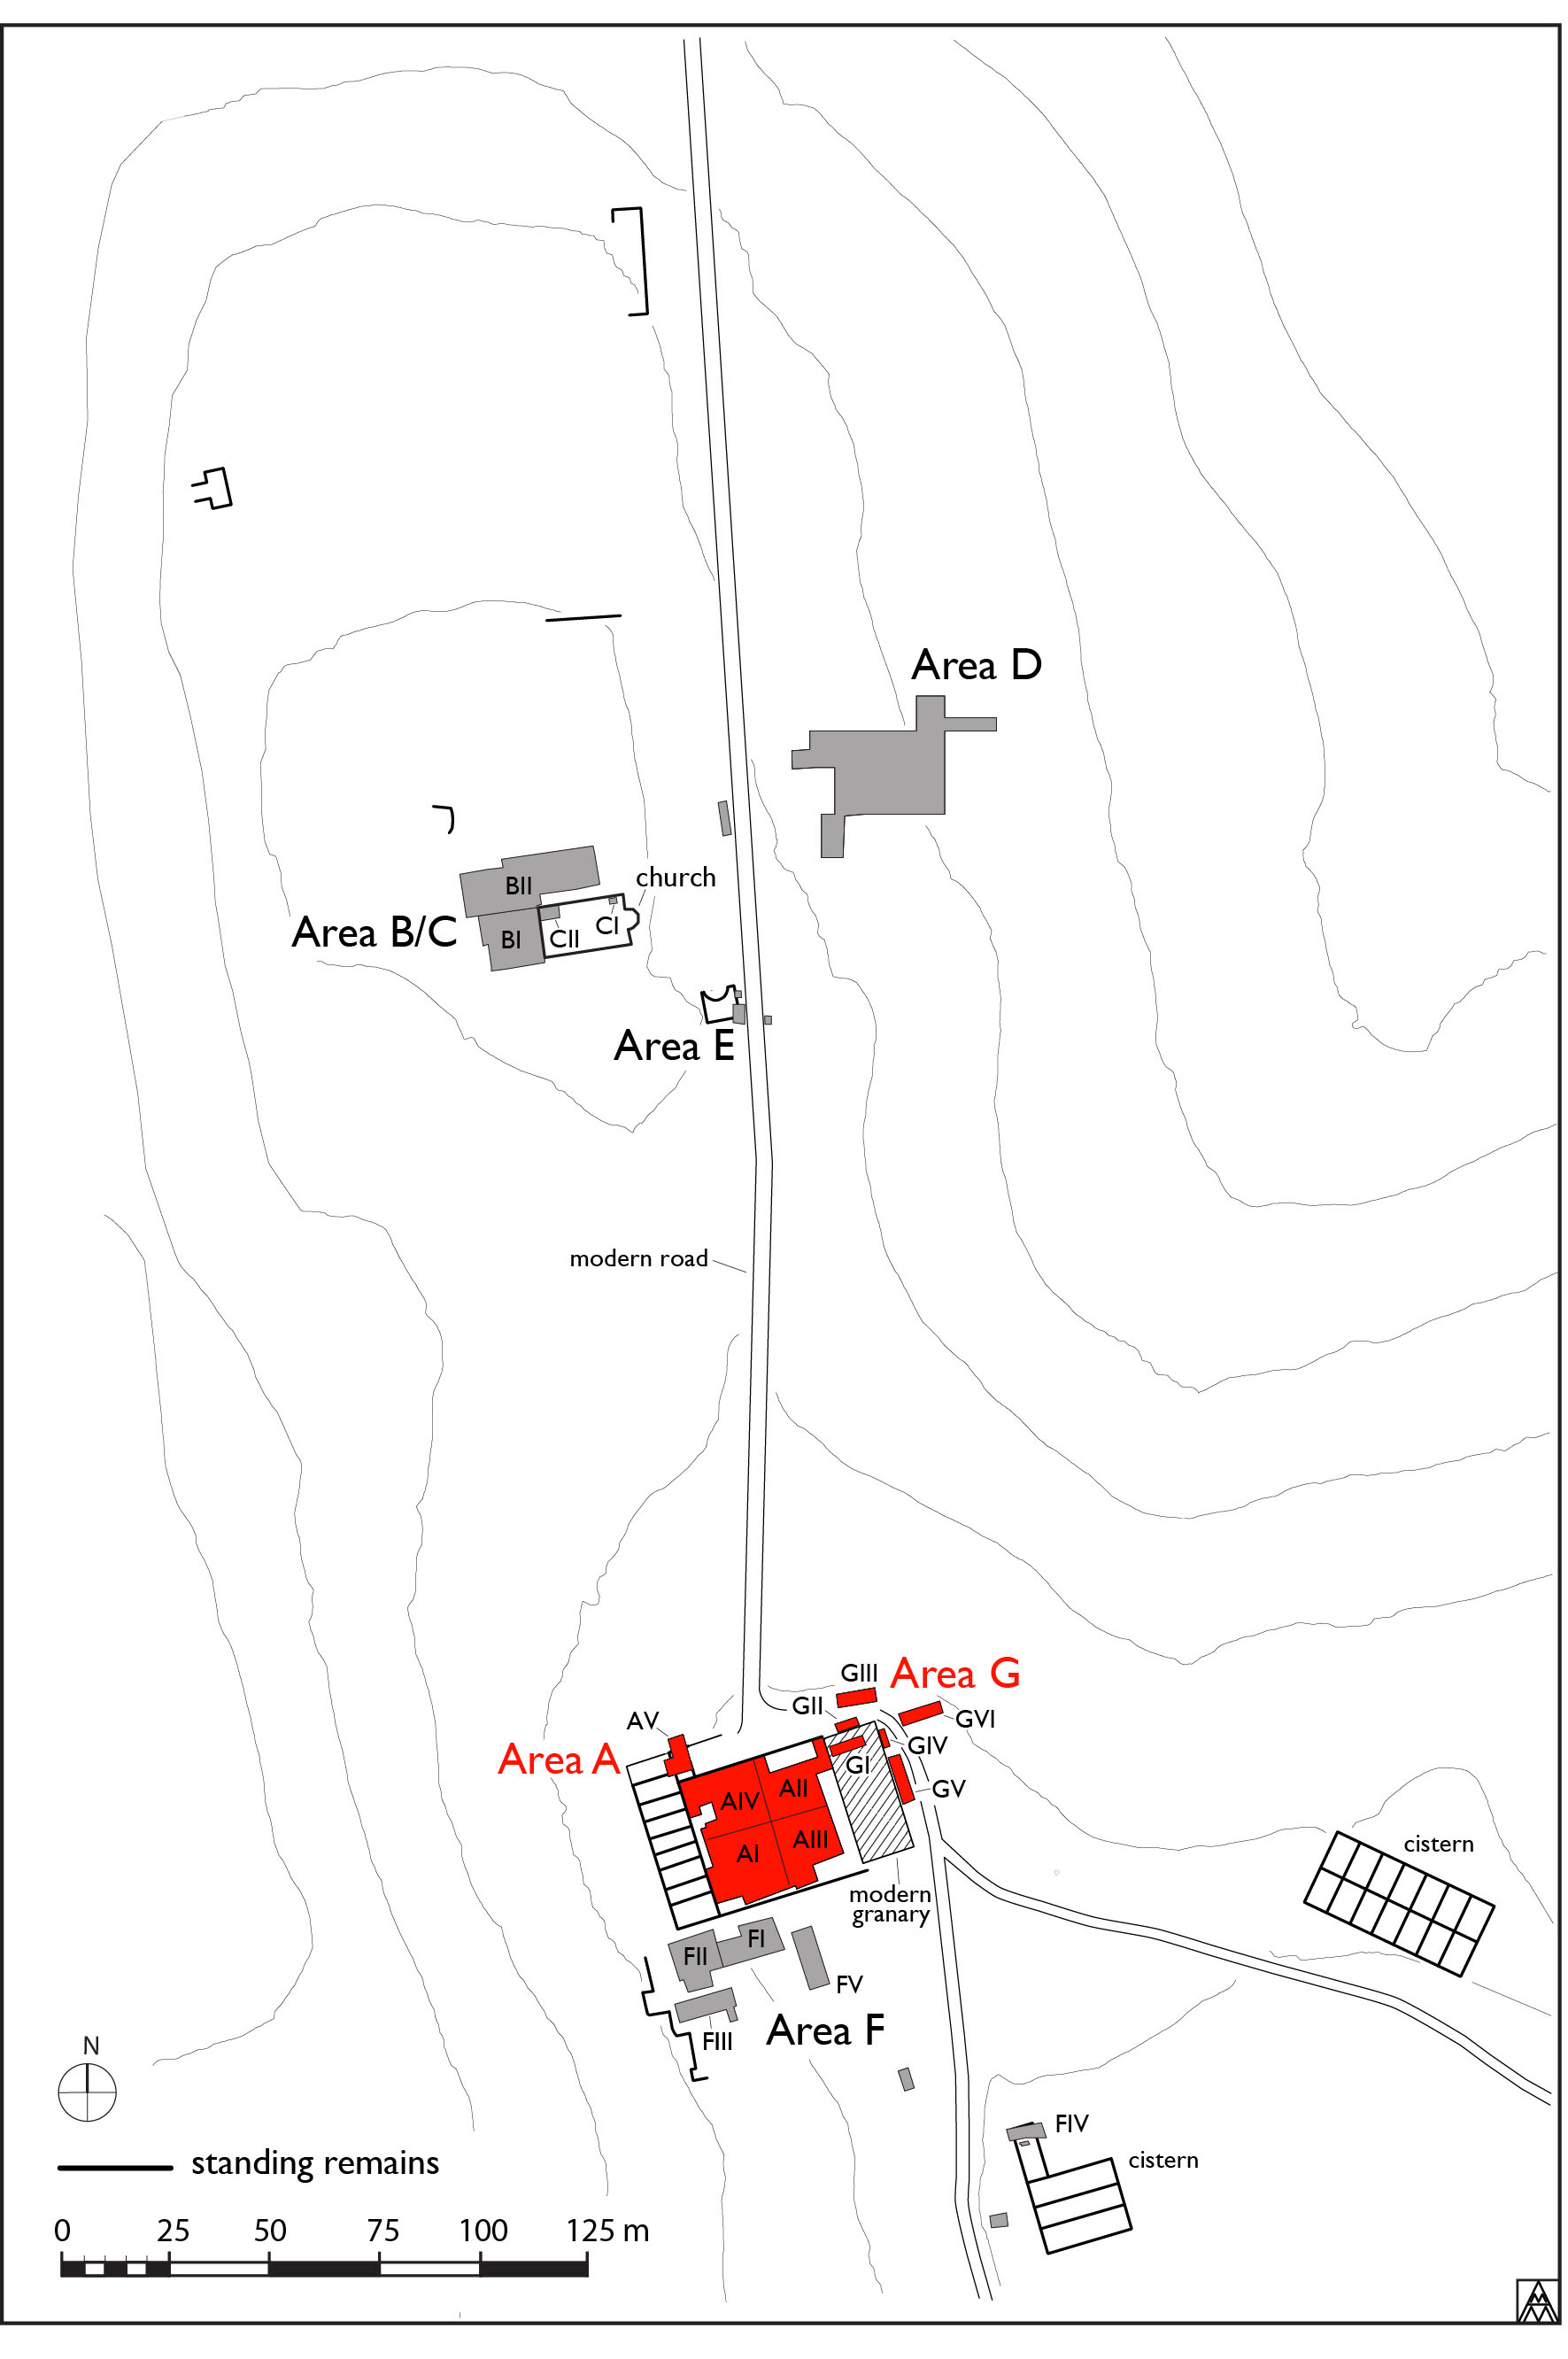 Figure 1. General site plan showing location of Areas A and G (Margaret Andrews).